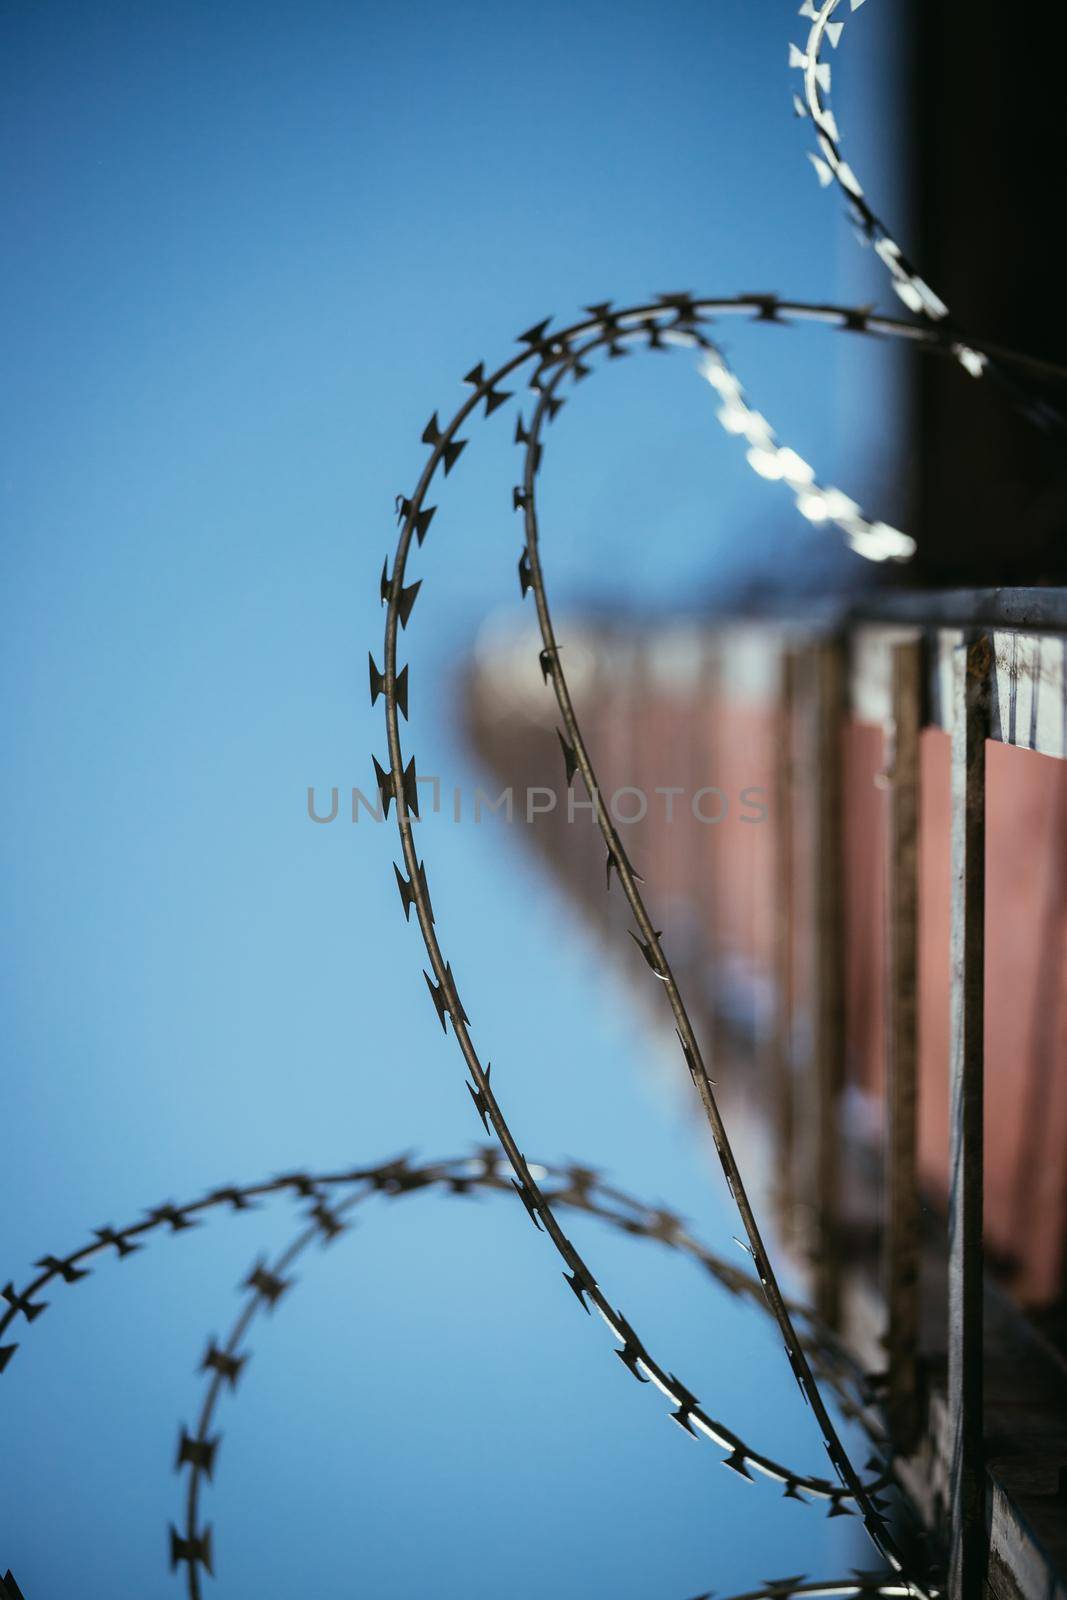 Barbed wire in the prison or on military base, close up perspective by Daxenbichler